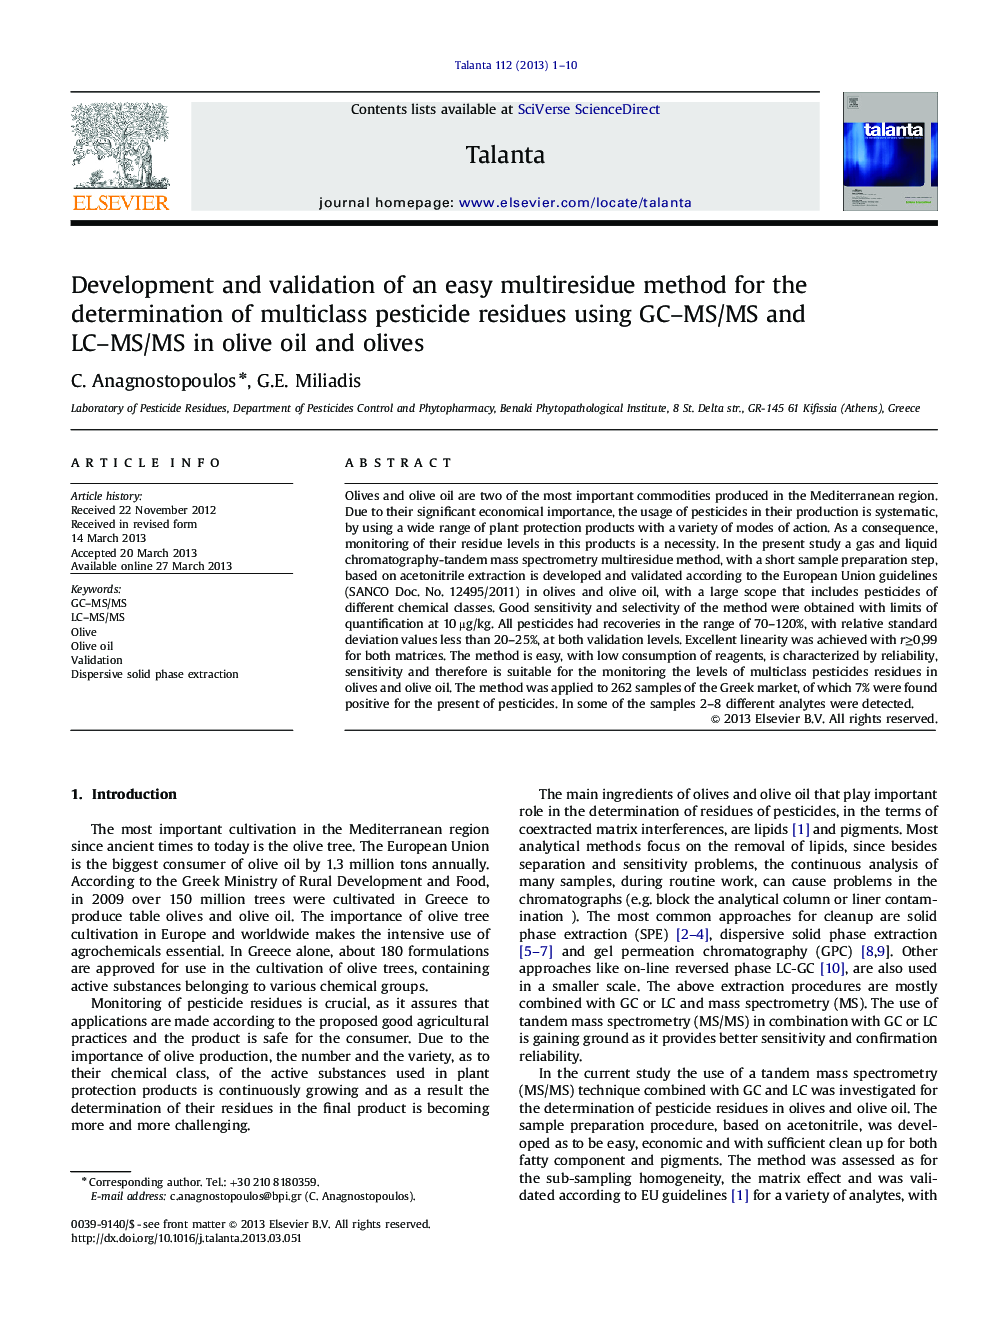 Development and validation of an easy multiresidue method for the determination of multiclass pesticide residues using GC-MS/MS and LC-MS/MS in olive oil and olives